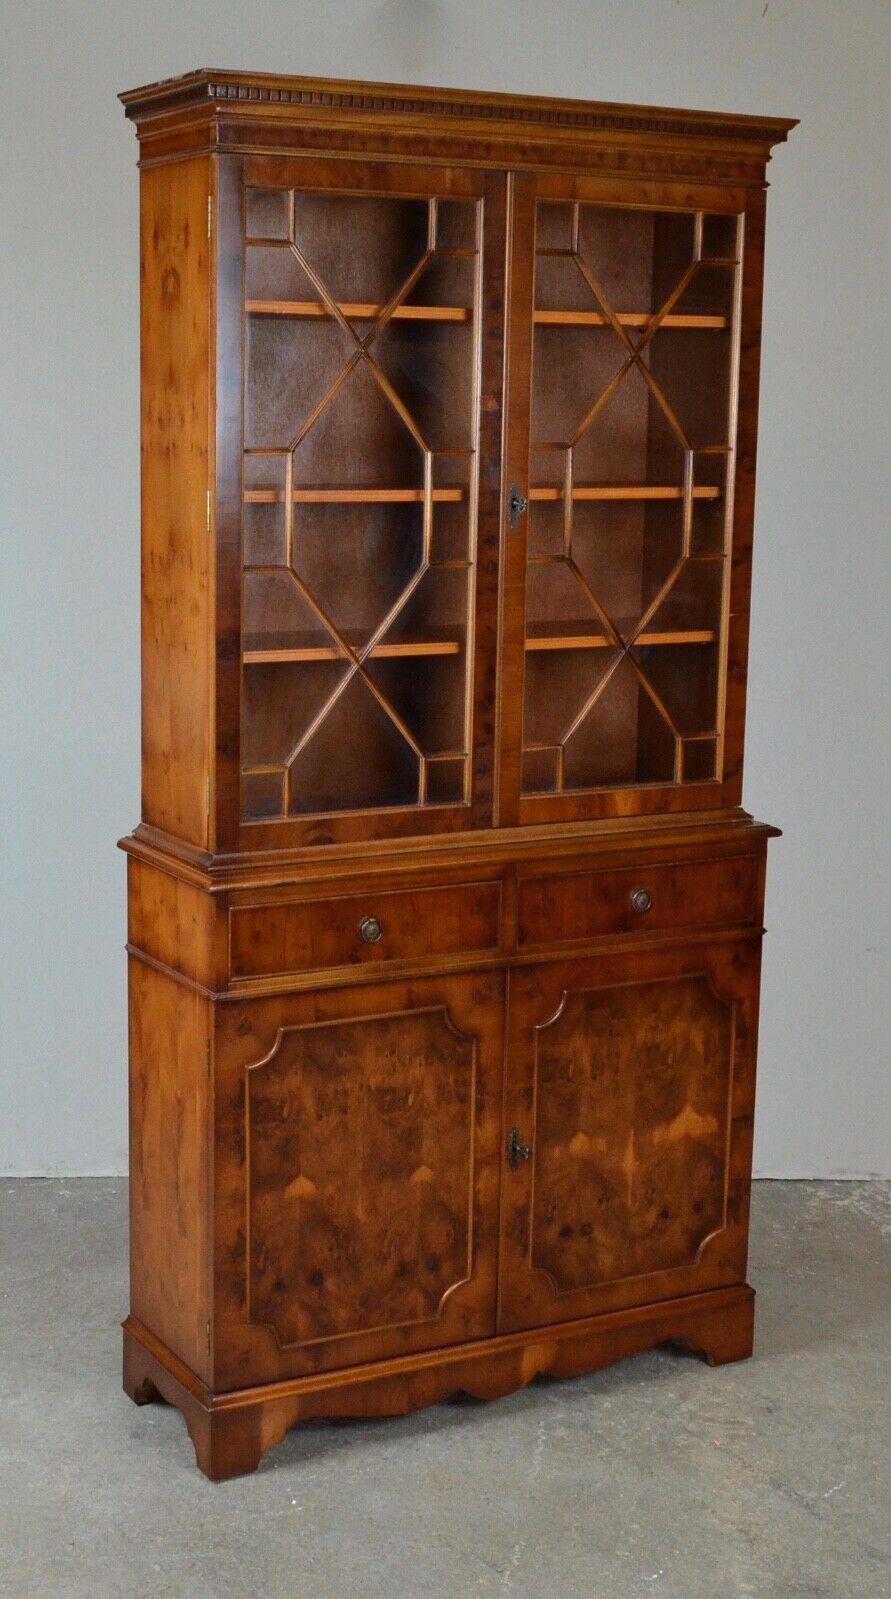 We are delighted to offer for sale this lovely antique Bevan Funnell LTD glazed mahogany bookcase. 

Well made in the 20th century, it has dental-style molding below the cornice, astral-glazed doors on the top section, two drawers in between, and